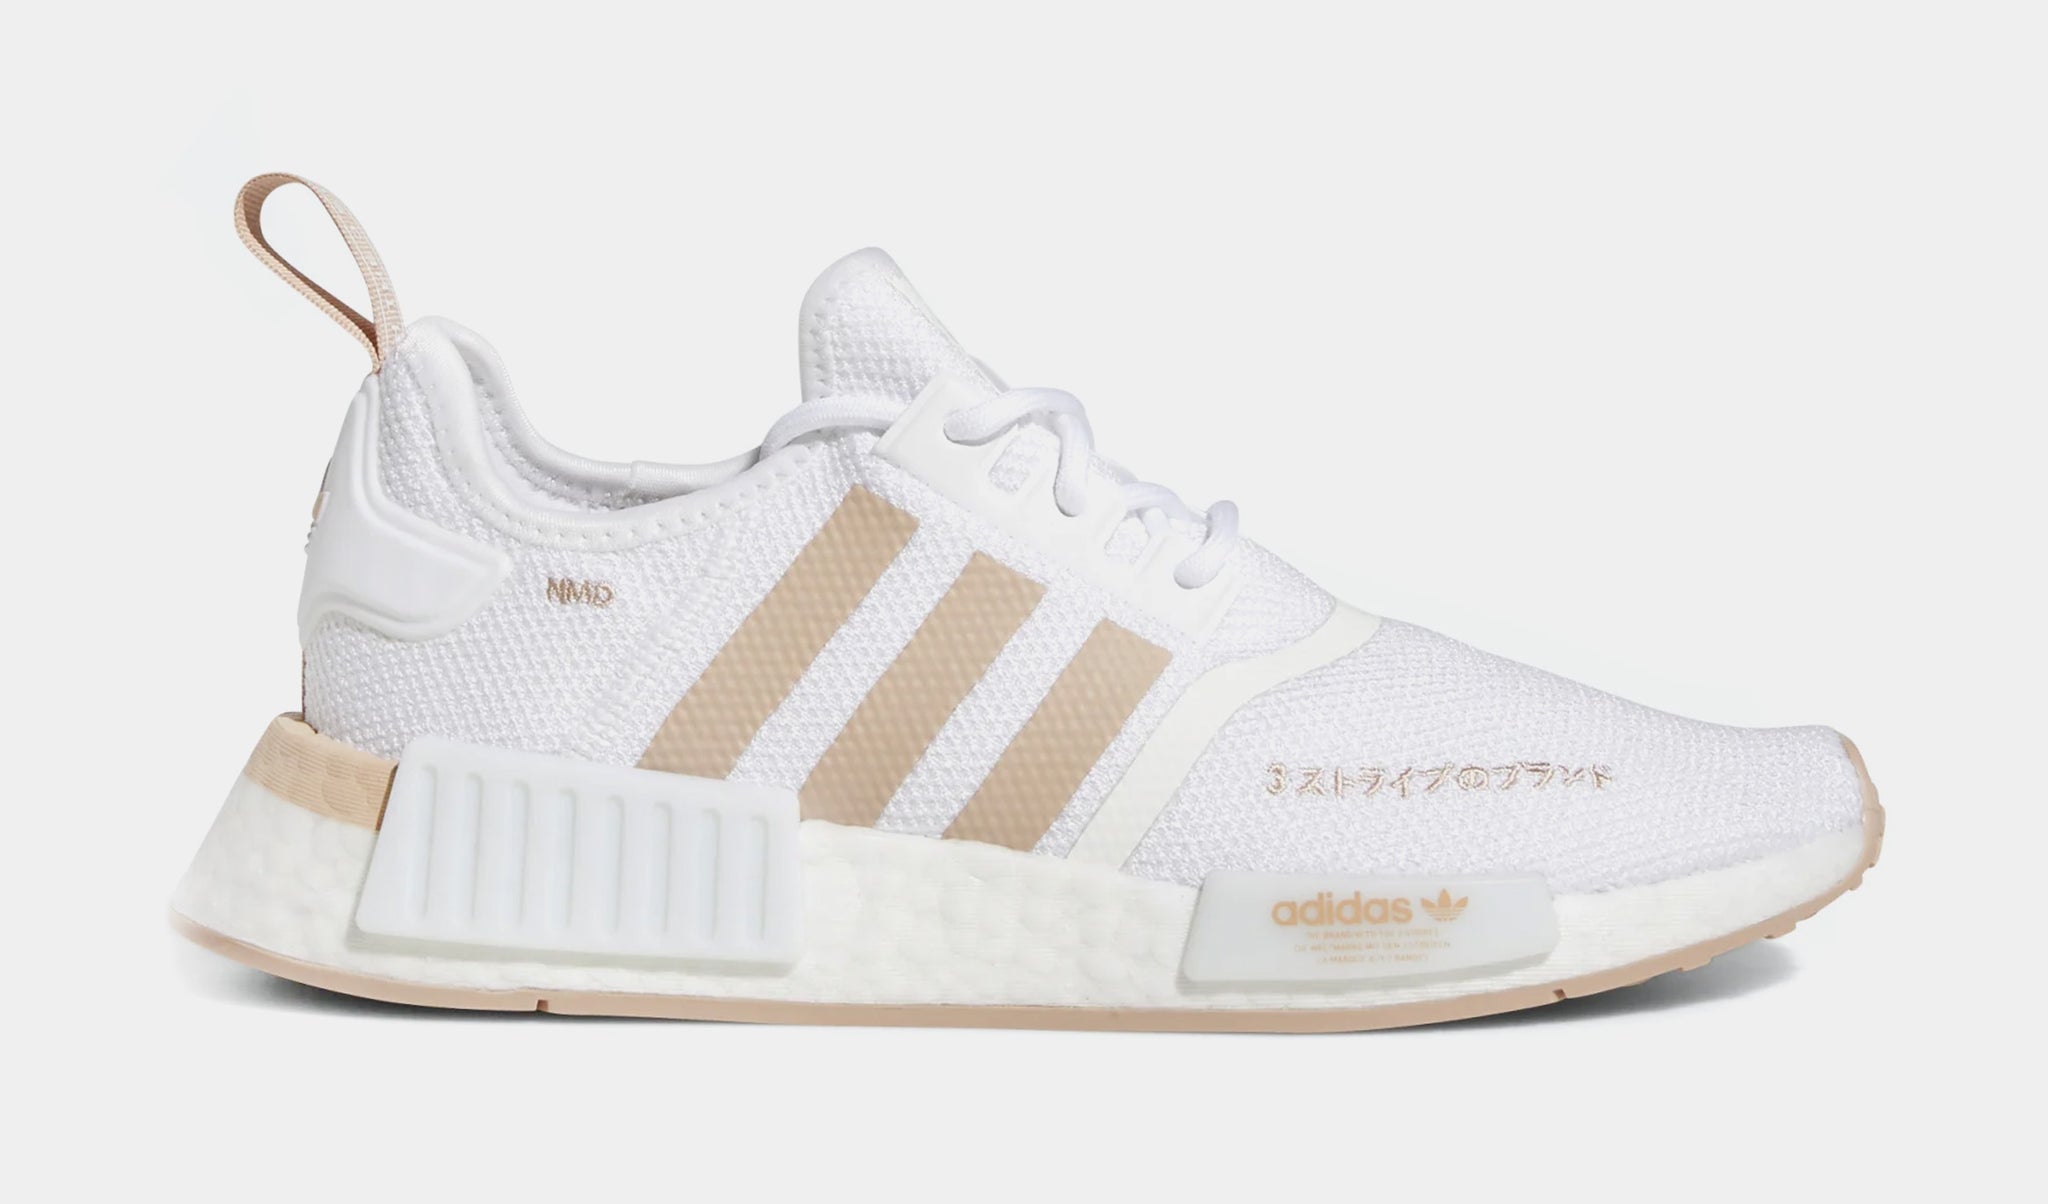 adidas nmd_r1 women's shoes